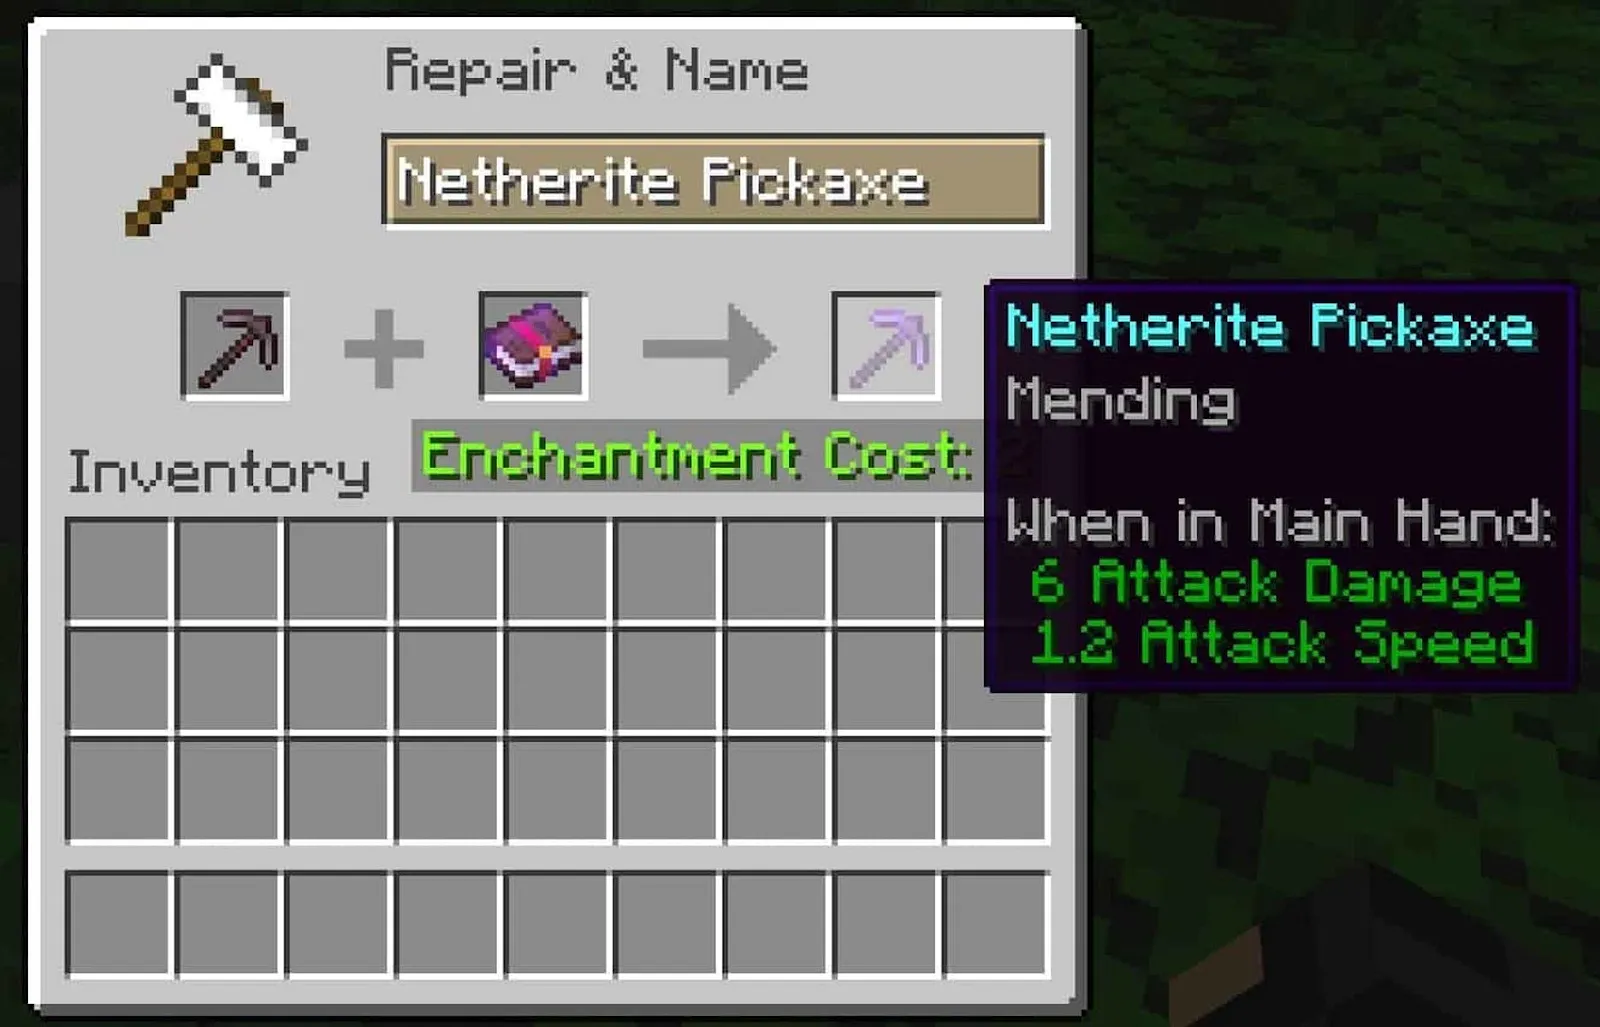 An image showing a netherite pickaxe with the mending enchantment in Minecraft